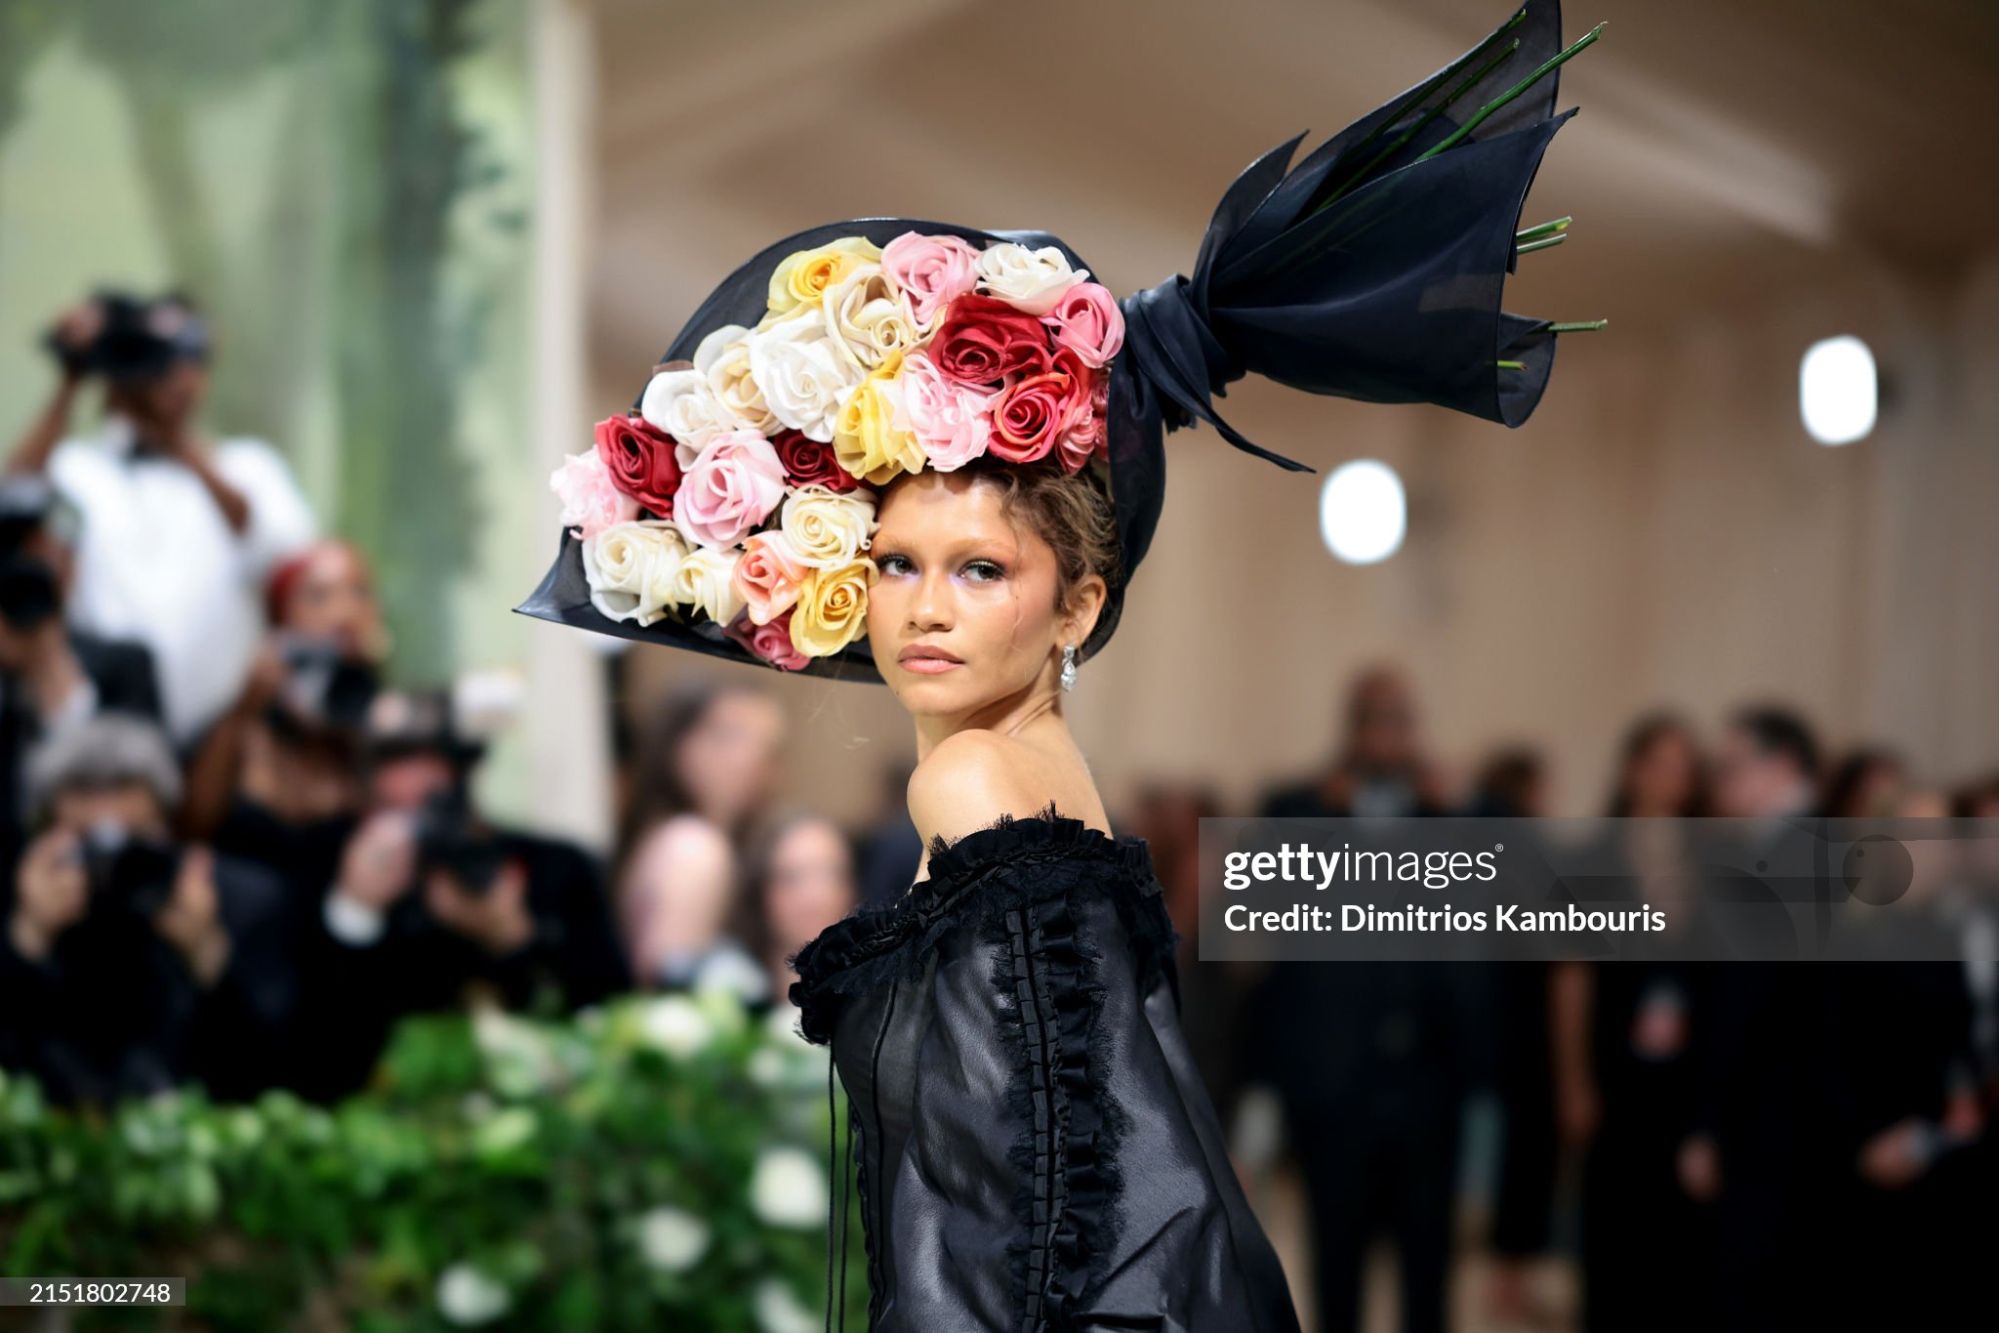 gettyimages-2151802748-2048x2048.jpg